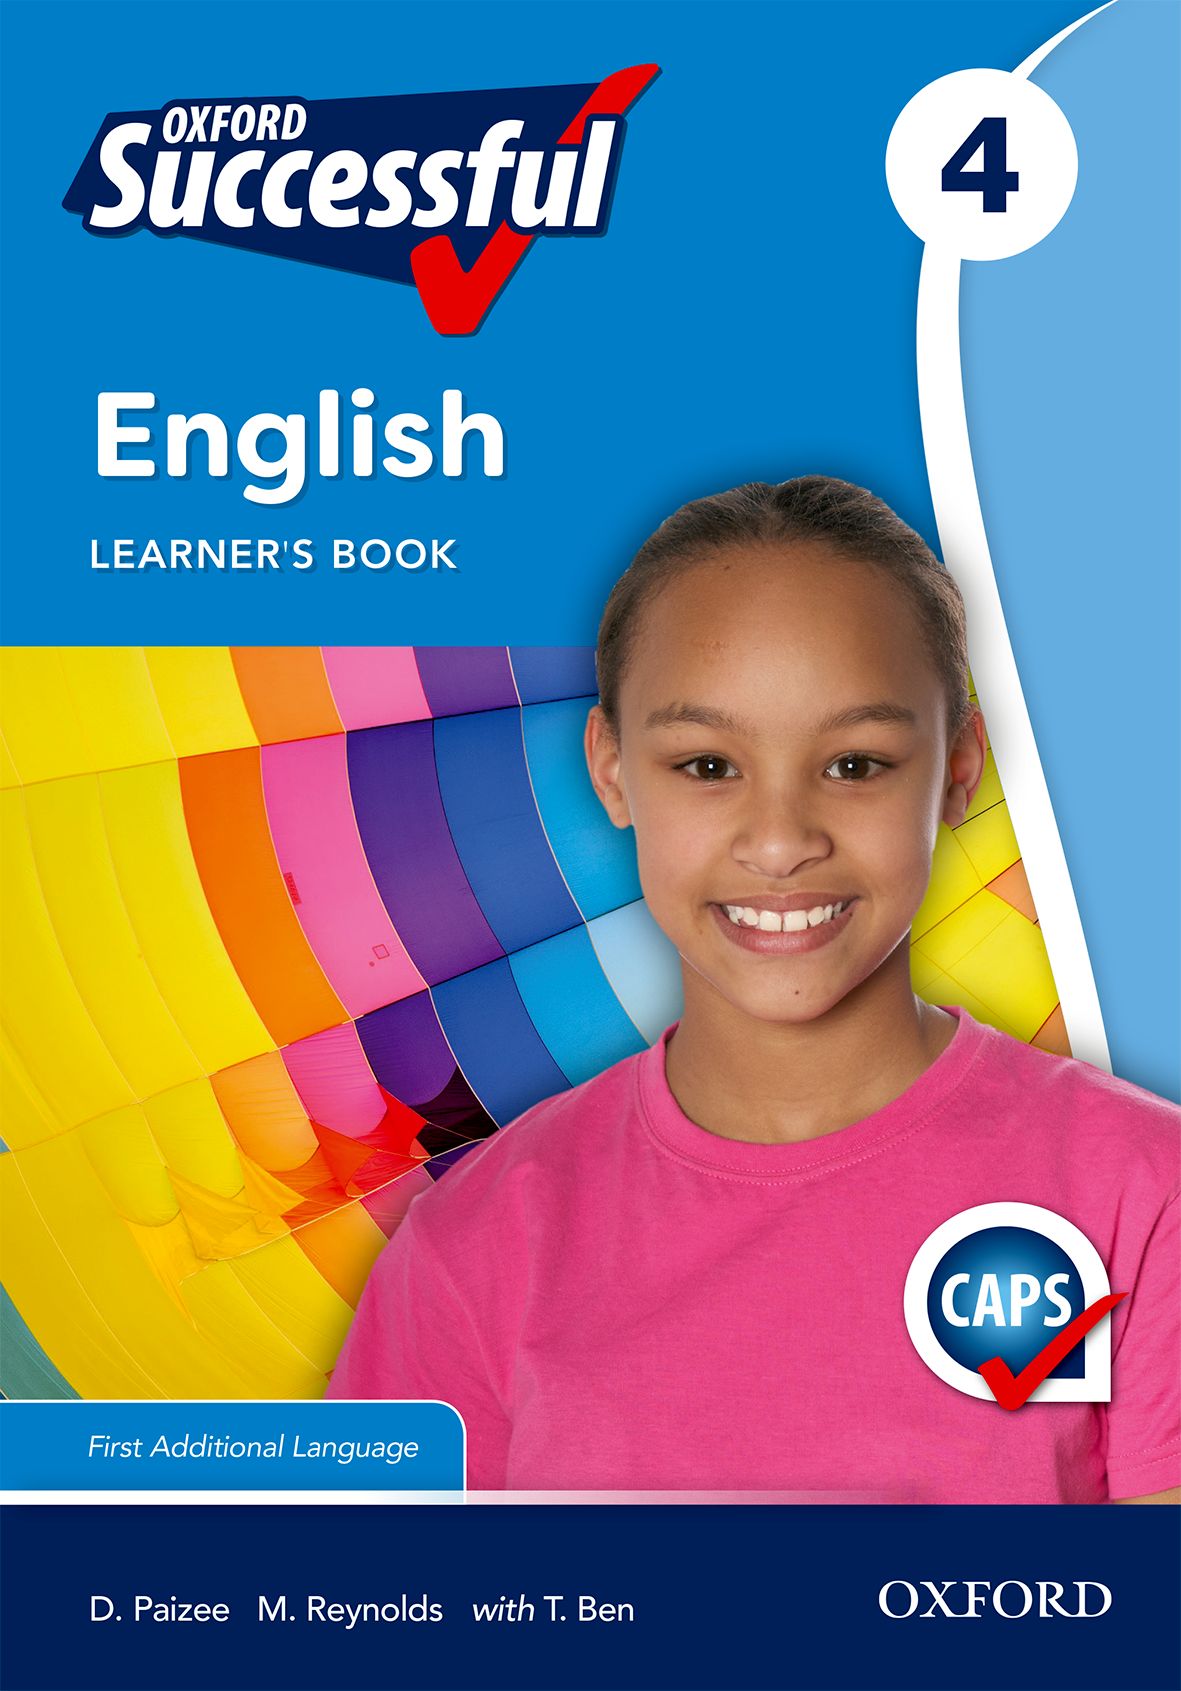 oxford-successful-english-first-additional-language-grade-4-learner-s-book-ready2learn